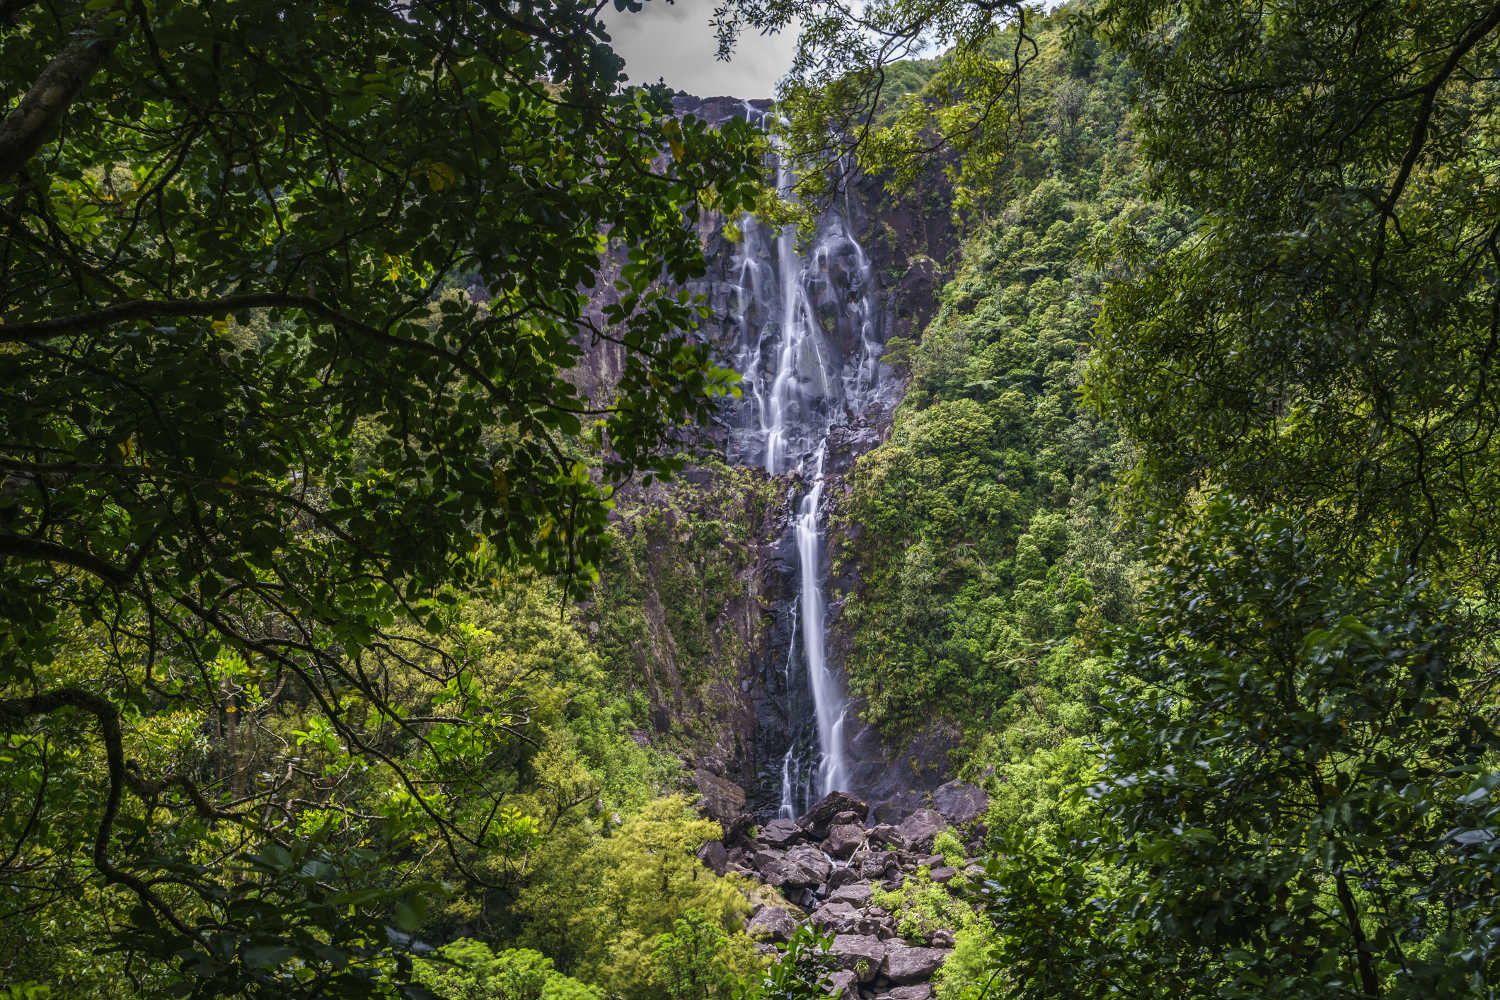 Wairere falls, waterfalls in a forest, Bay of Plenty